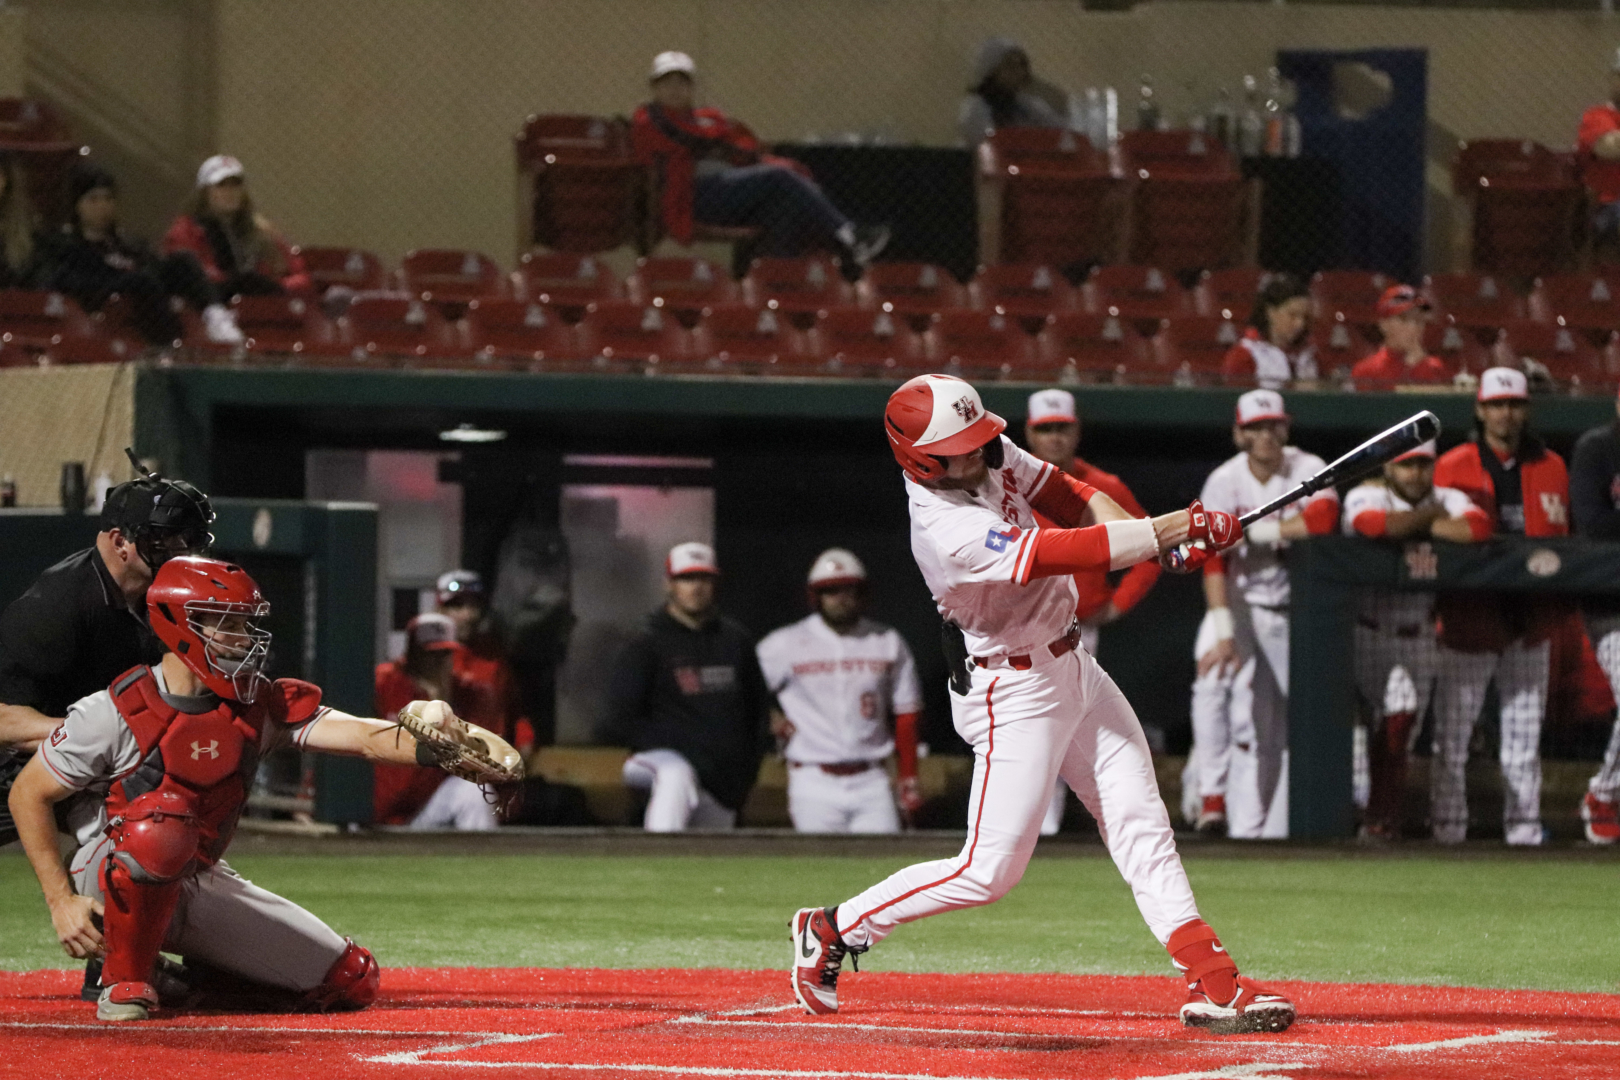 UH baseball left fielder Brandon Uhse hit his first home run of 2022 in the Cougars' win over Lamar on Tuesday night at Schroeder Park. | James Mueller/The Cougar